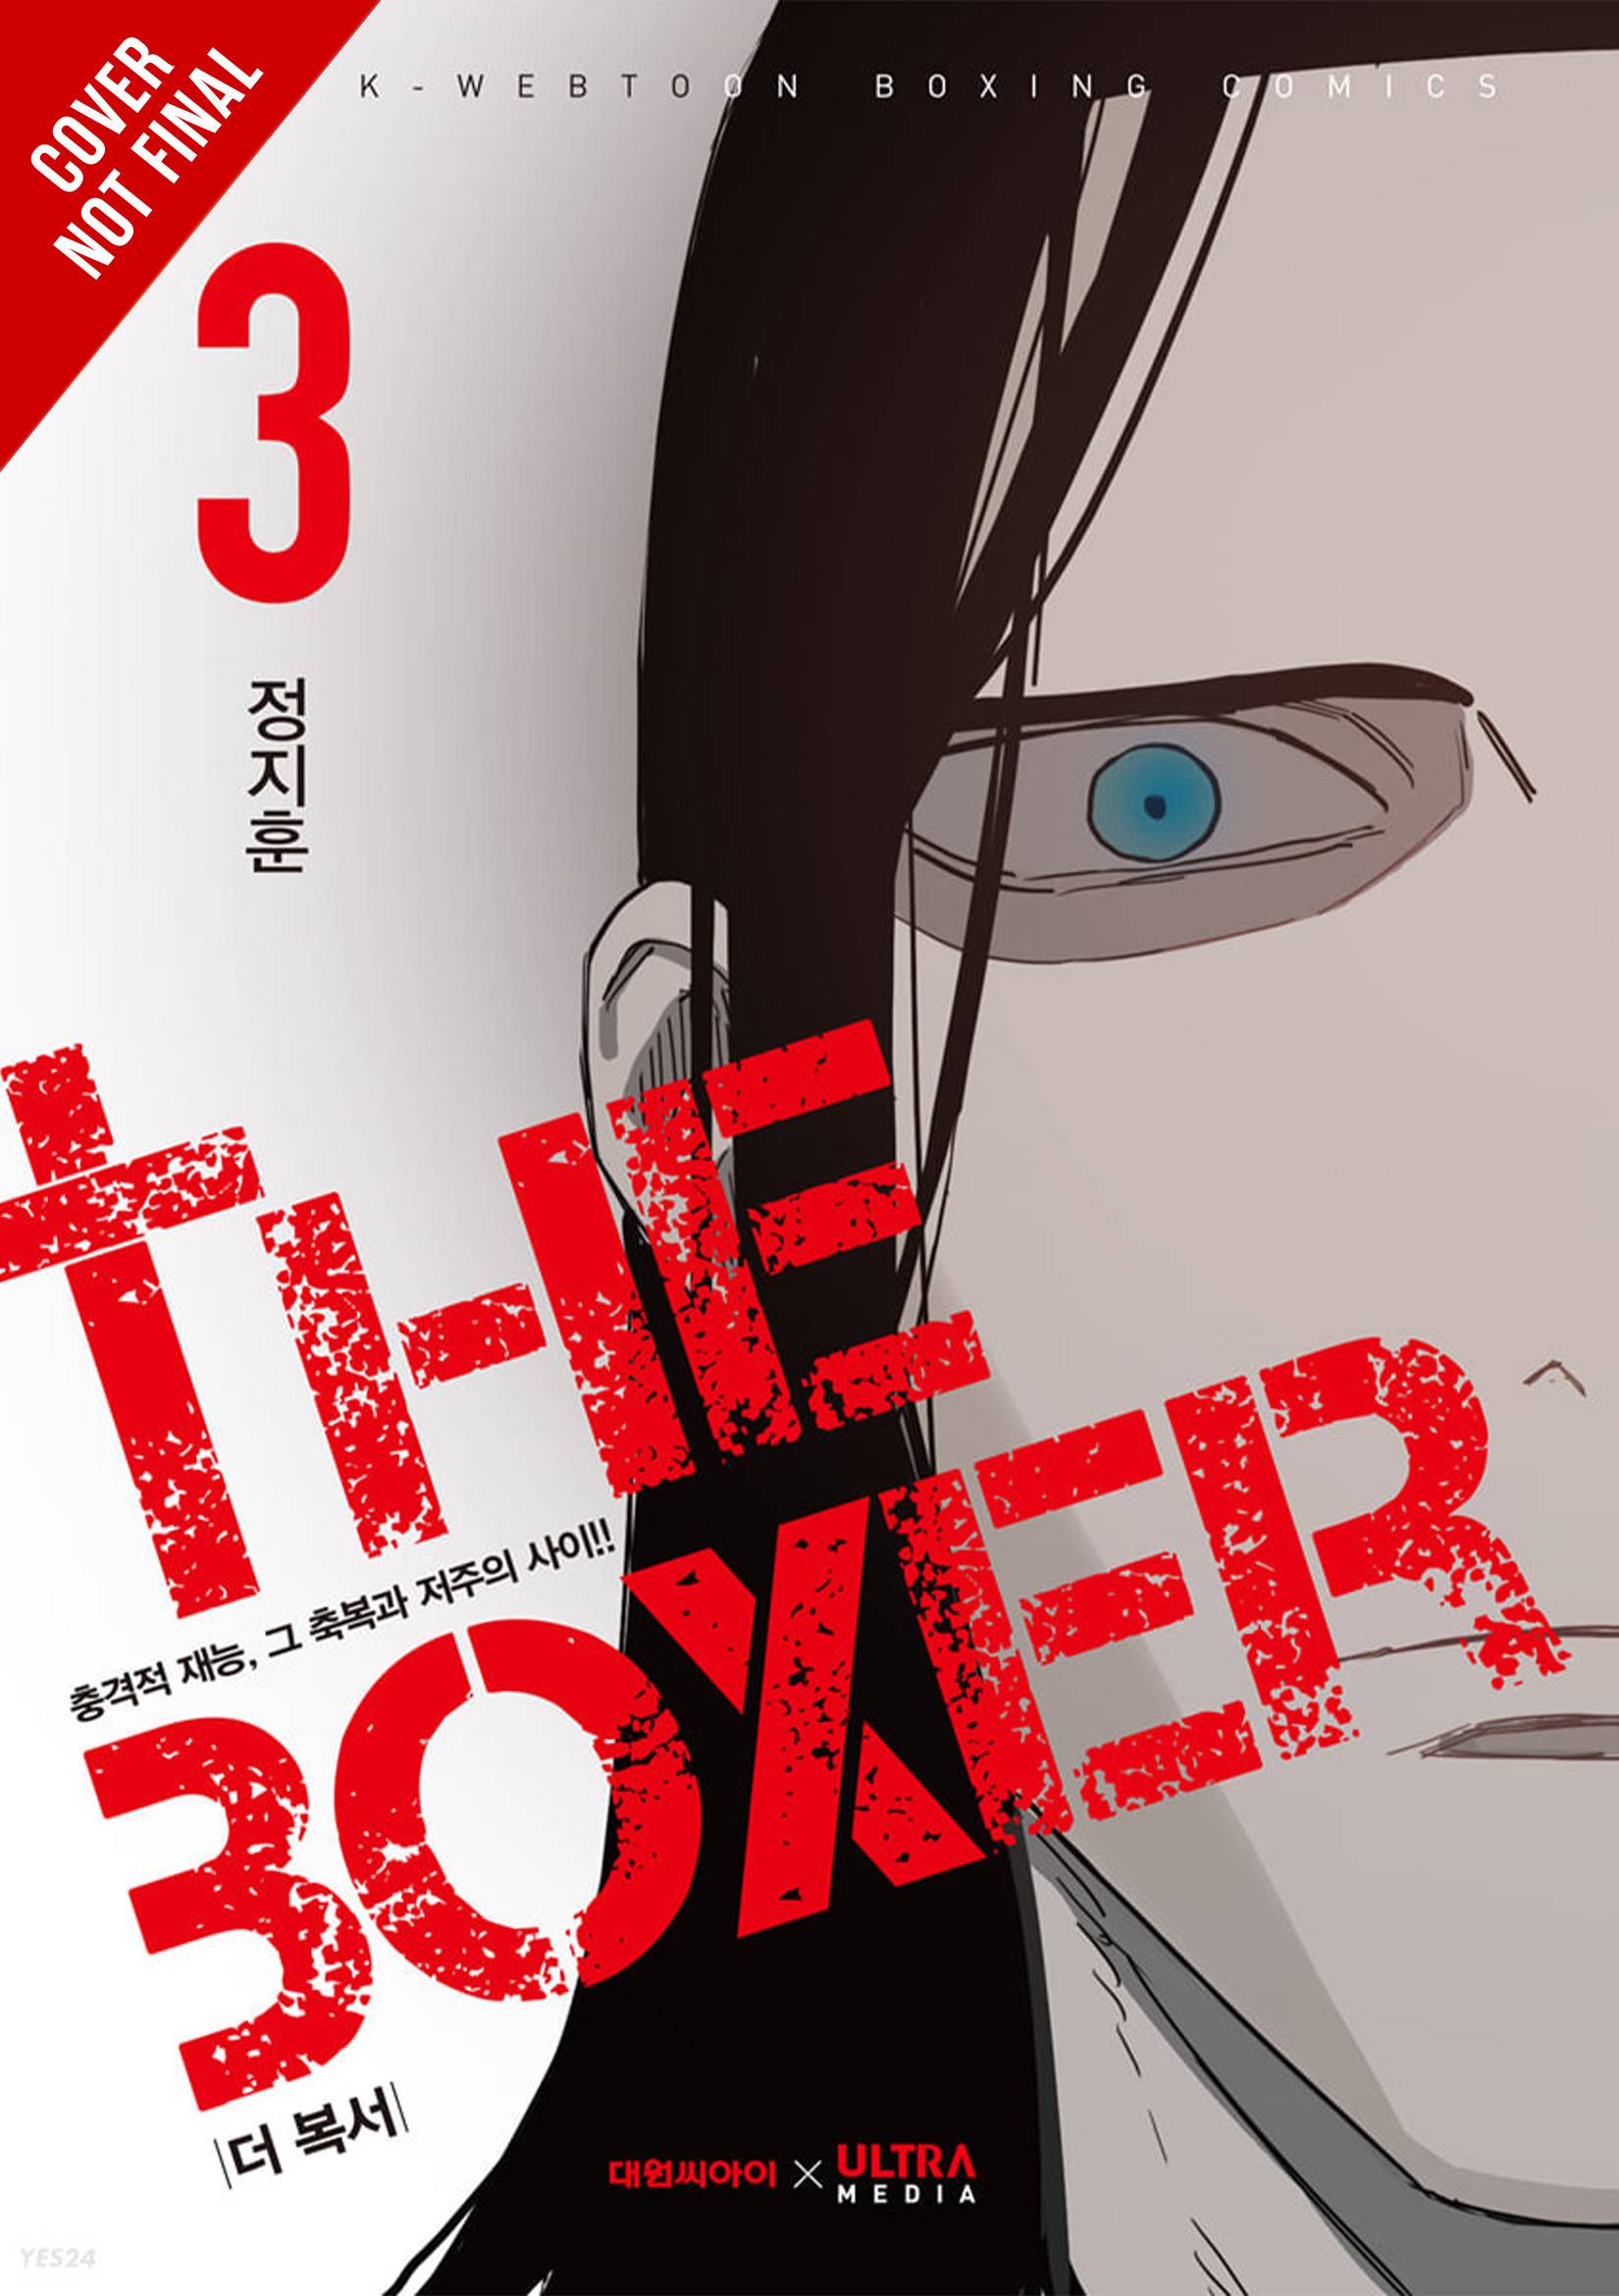 THE BOXER GN 03